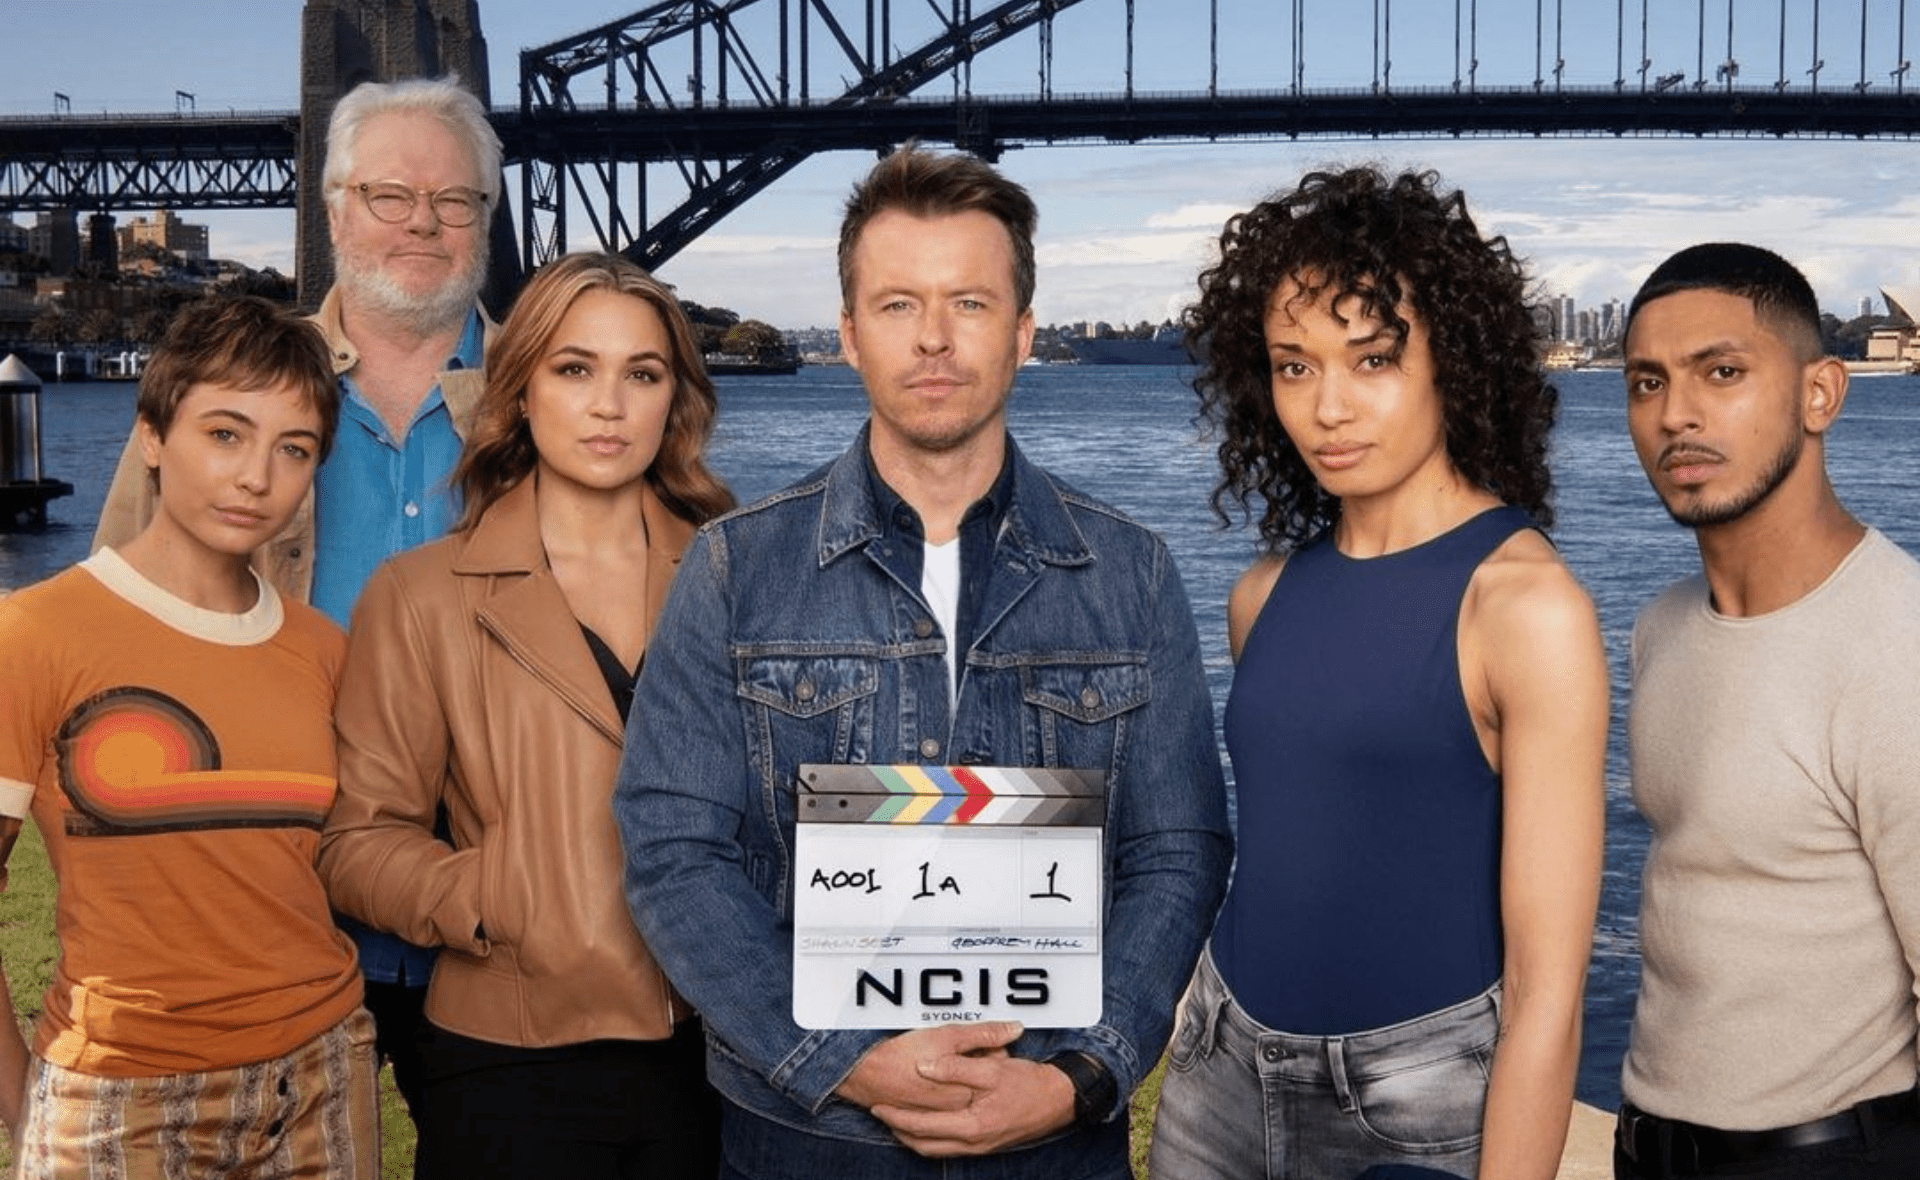 NCIS Sydney has been renewed for a second season